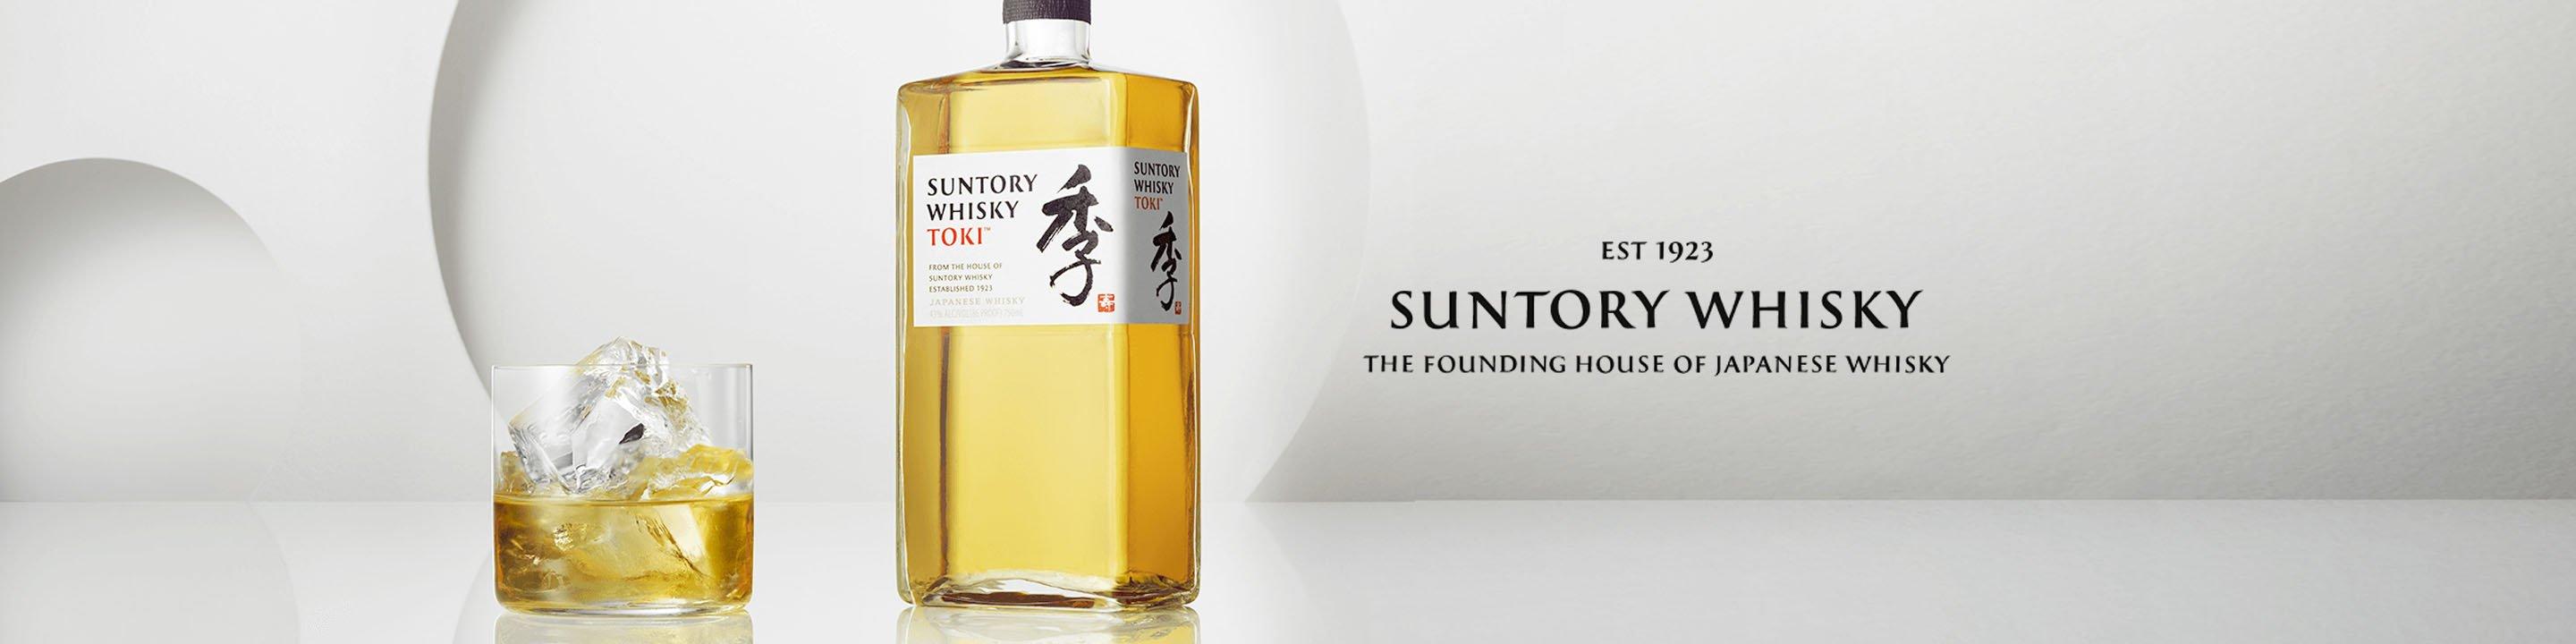 Suntory Whisky Toki™ is a vivid blend of carefully selected whiskies from the House of Suntory’s globally acclaimed Hakushu, Yamazaki, and Chita distilleries.

Buy Suntory Whisky Toki online now from nearby liquor stores via Minibar Delivery. 